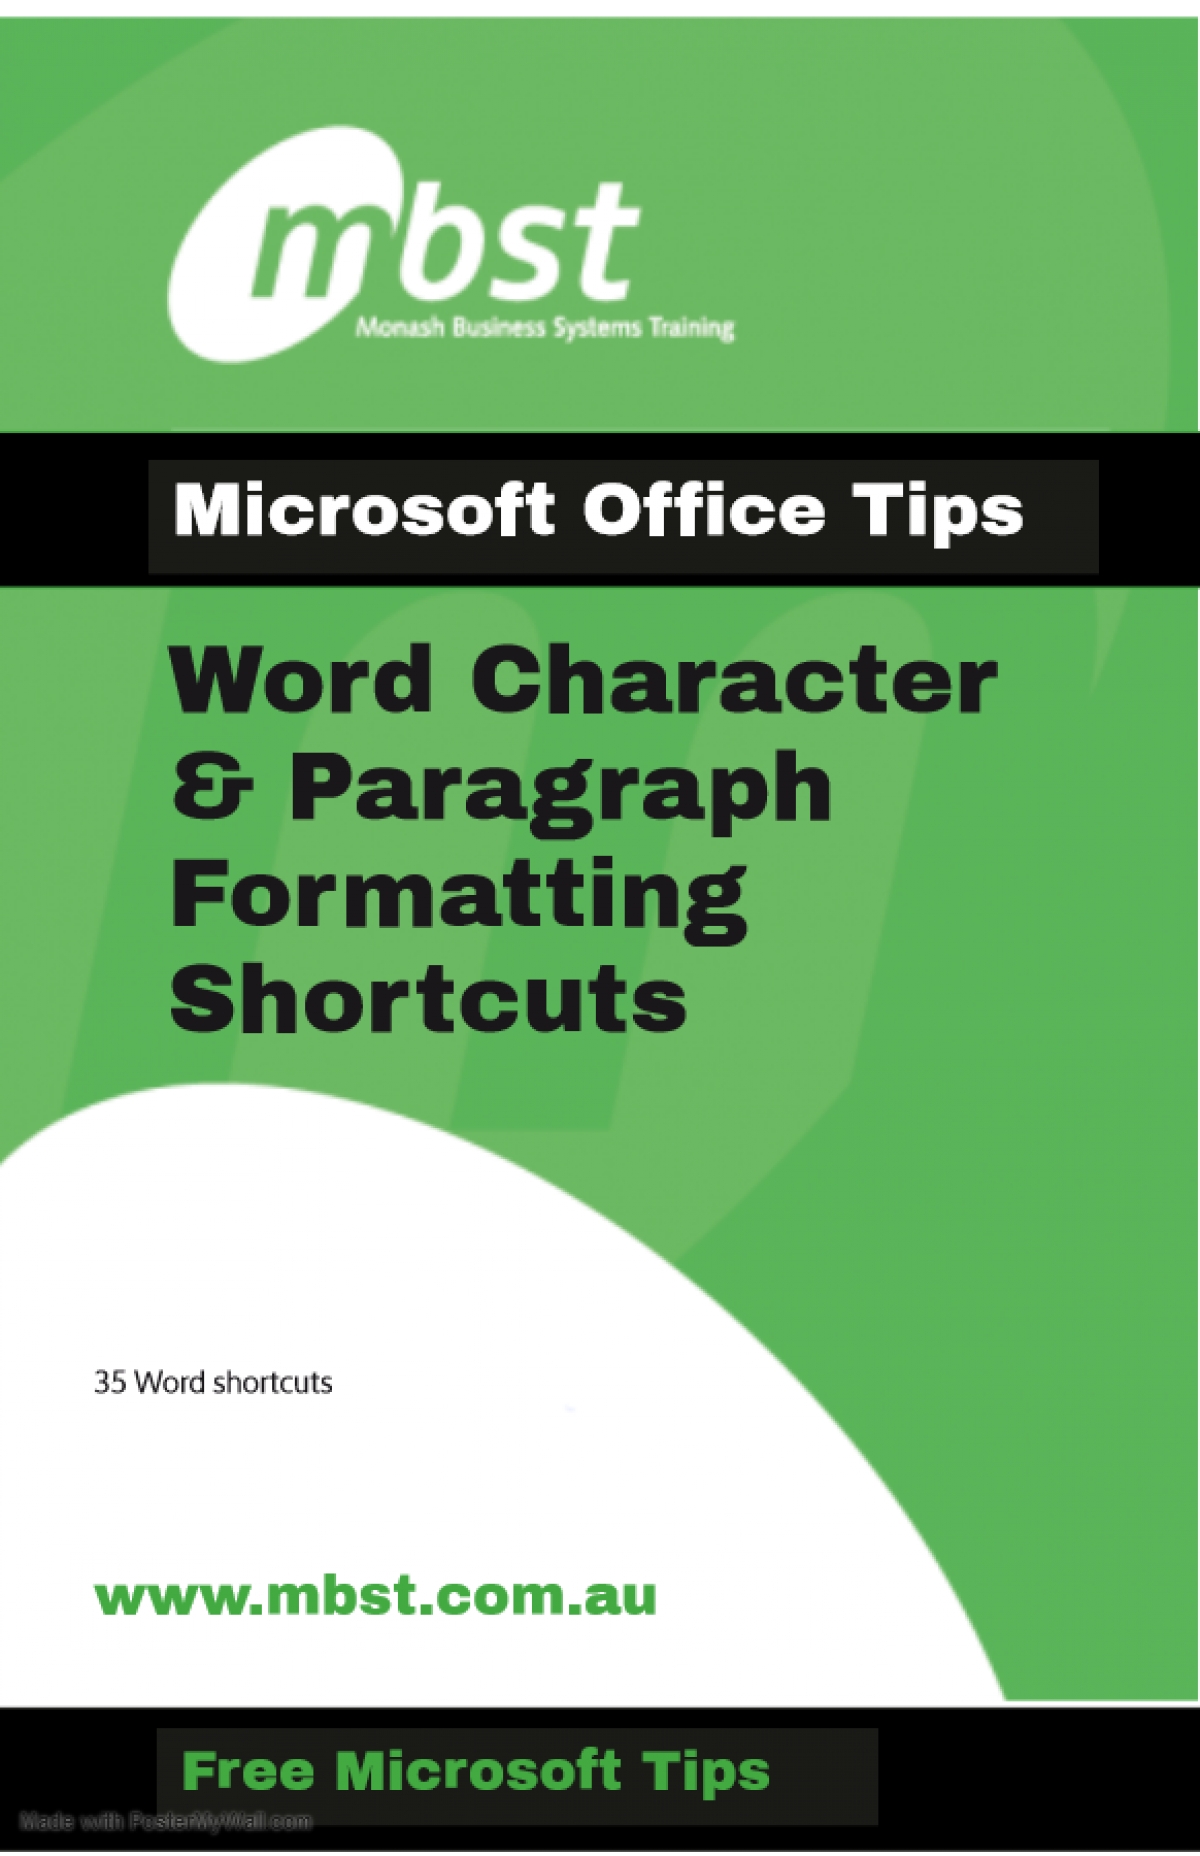 MS Word Character & Paragraph Formatting Shortcuts